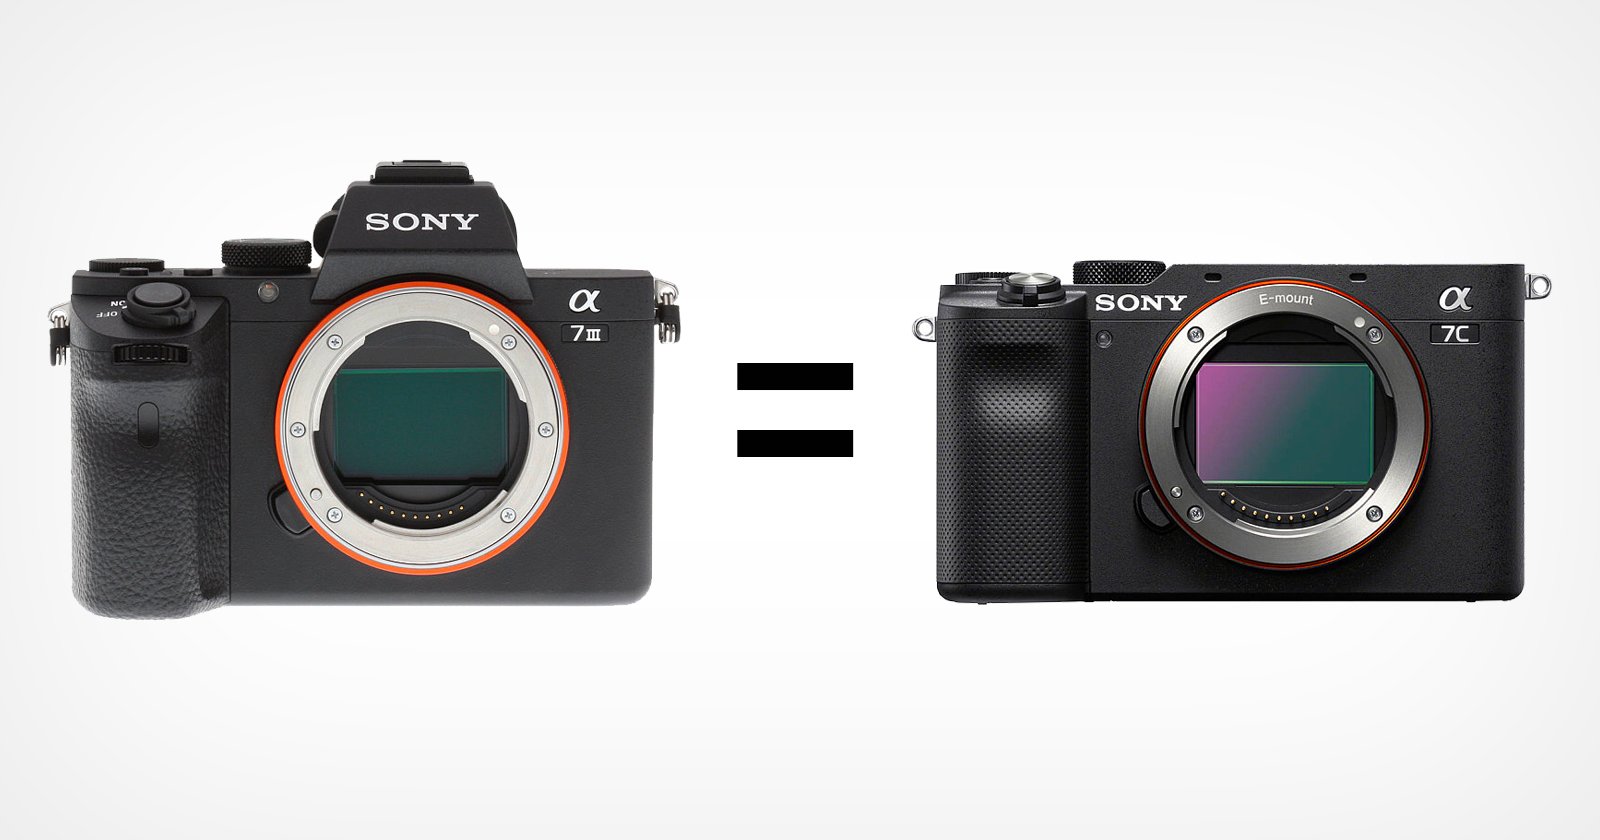 https://petapixel.com/assets/uploads/2020/10/Images-from-the-Sony-a7C-22More-or-Less-Identical22-to-Sony-A7-III.jpg